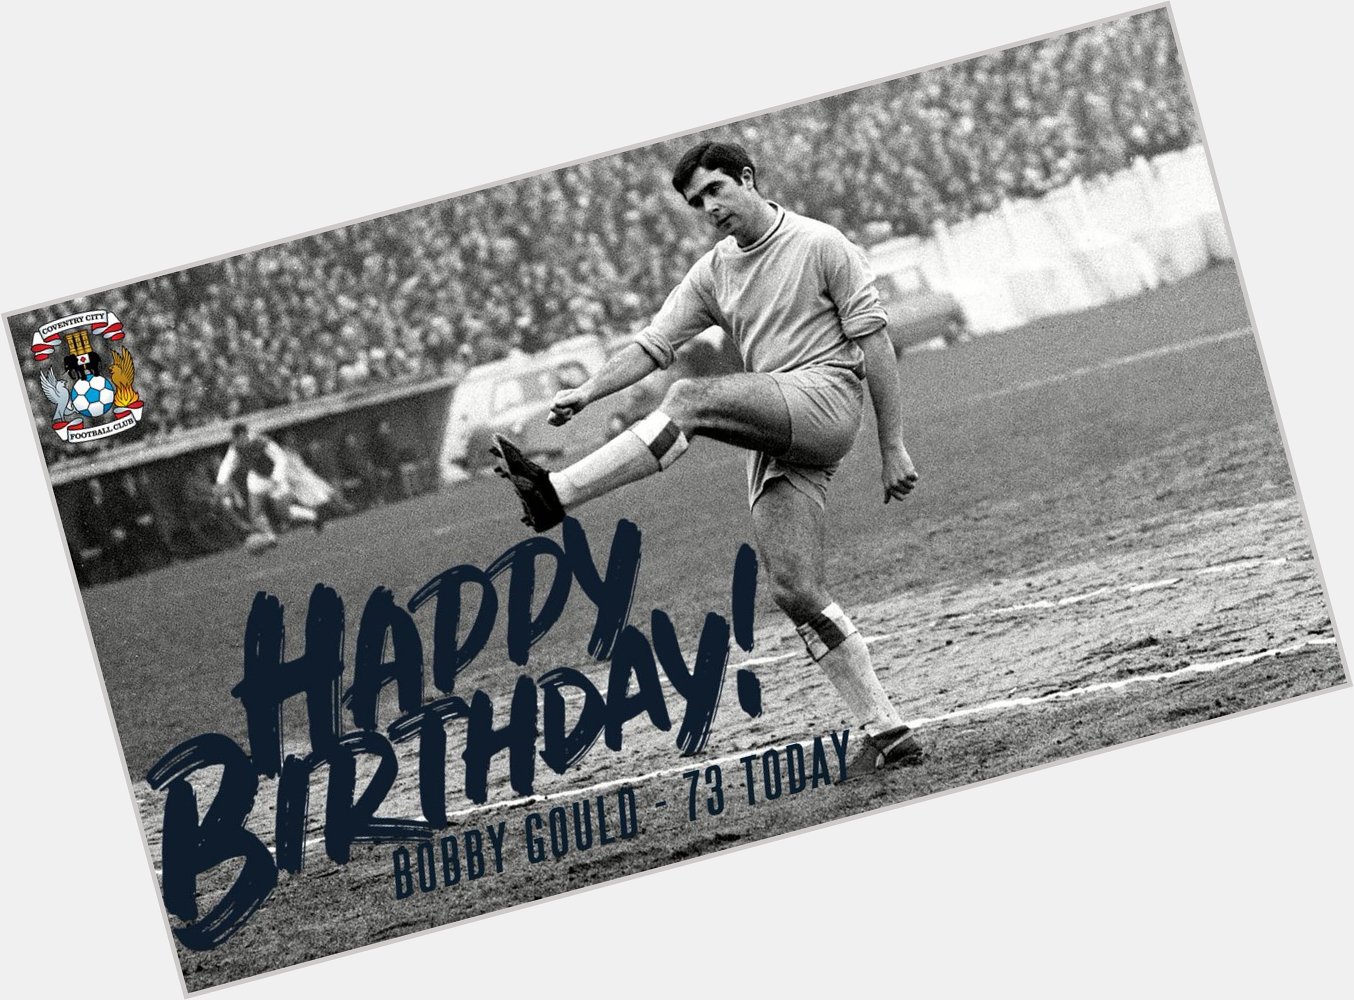  Happy Birthday to former Sky Blues player and manager Bobby Gould, who is 73 today! 